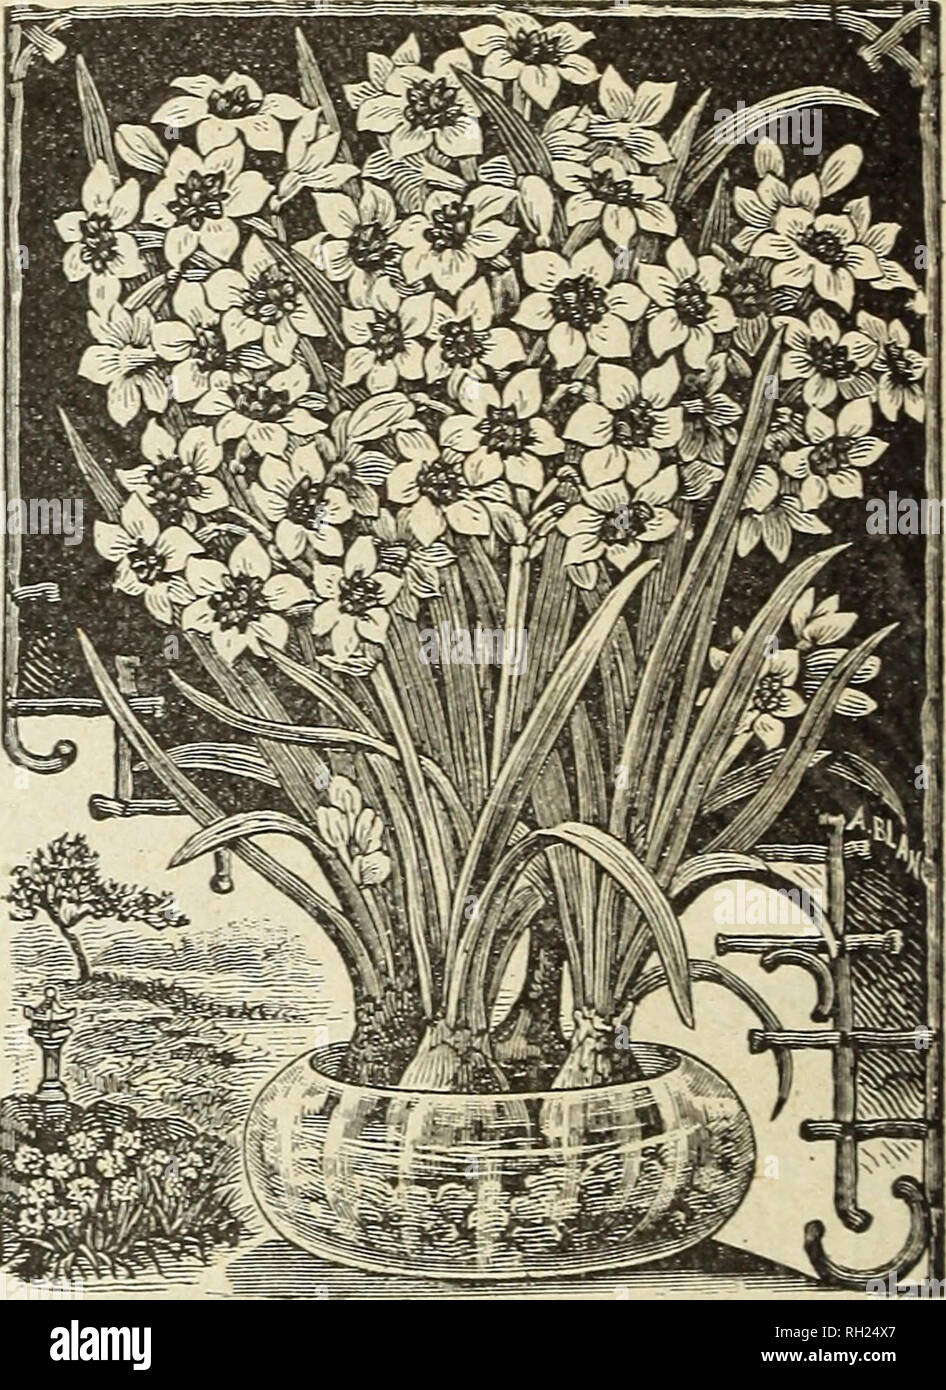 . Bulbs and plants : autumn 1903. Bulbs (Plants) Catalogs; House plants Catalogs. PAPER WHITE POLYANTHUS NABCISSTJS. Double Narcissus. Ea. Doz. Per 100 Albus Plenus Odoratus—Pare whits - eel scented, resem- 3 25 S1 50 Incomparable — Butter and Eggs sulphur yellow, sweet - ented 3 25 Orange Phoenix —White and orange 4 40 Von Sion —The finest of all double yellow Daffodils, used extensively for forcing as well as for bedding outdoors... 3 30 Double Nose von Sion—Large se.eeted bulbs that produce two or more flowers 4 40 Mixed 3 25 1 50 2 25 2 00 2 50 1 50 Polyanthus Narcissus. The Polyanthus var Stock Photo